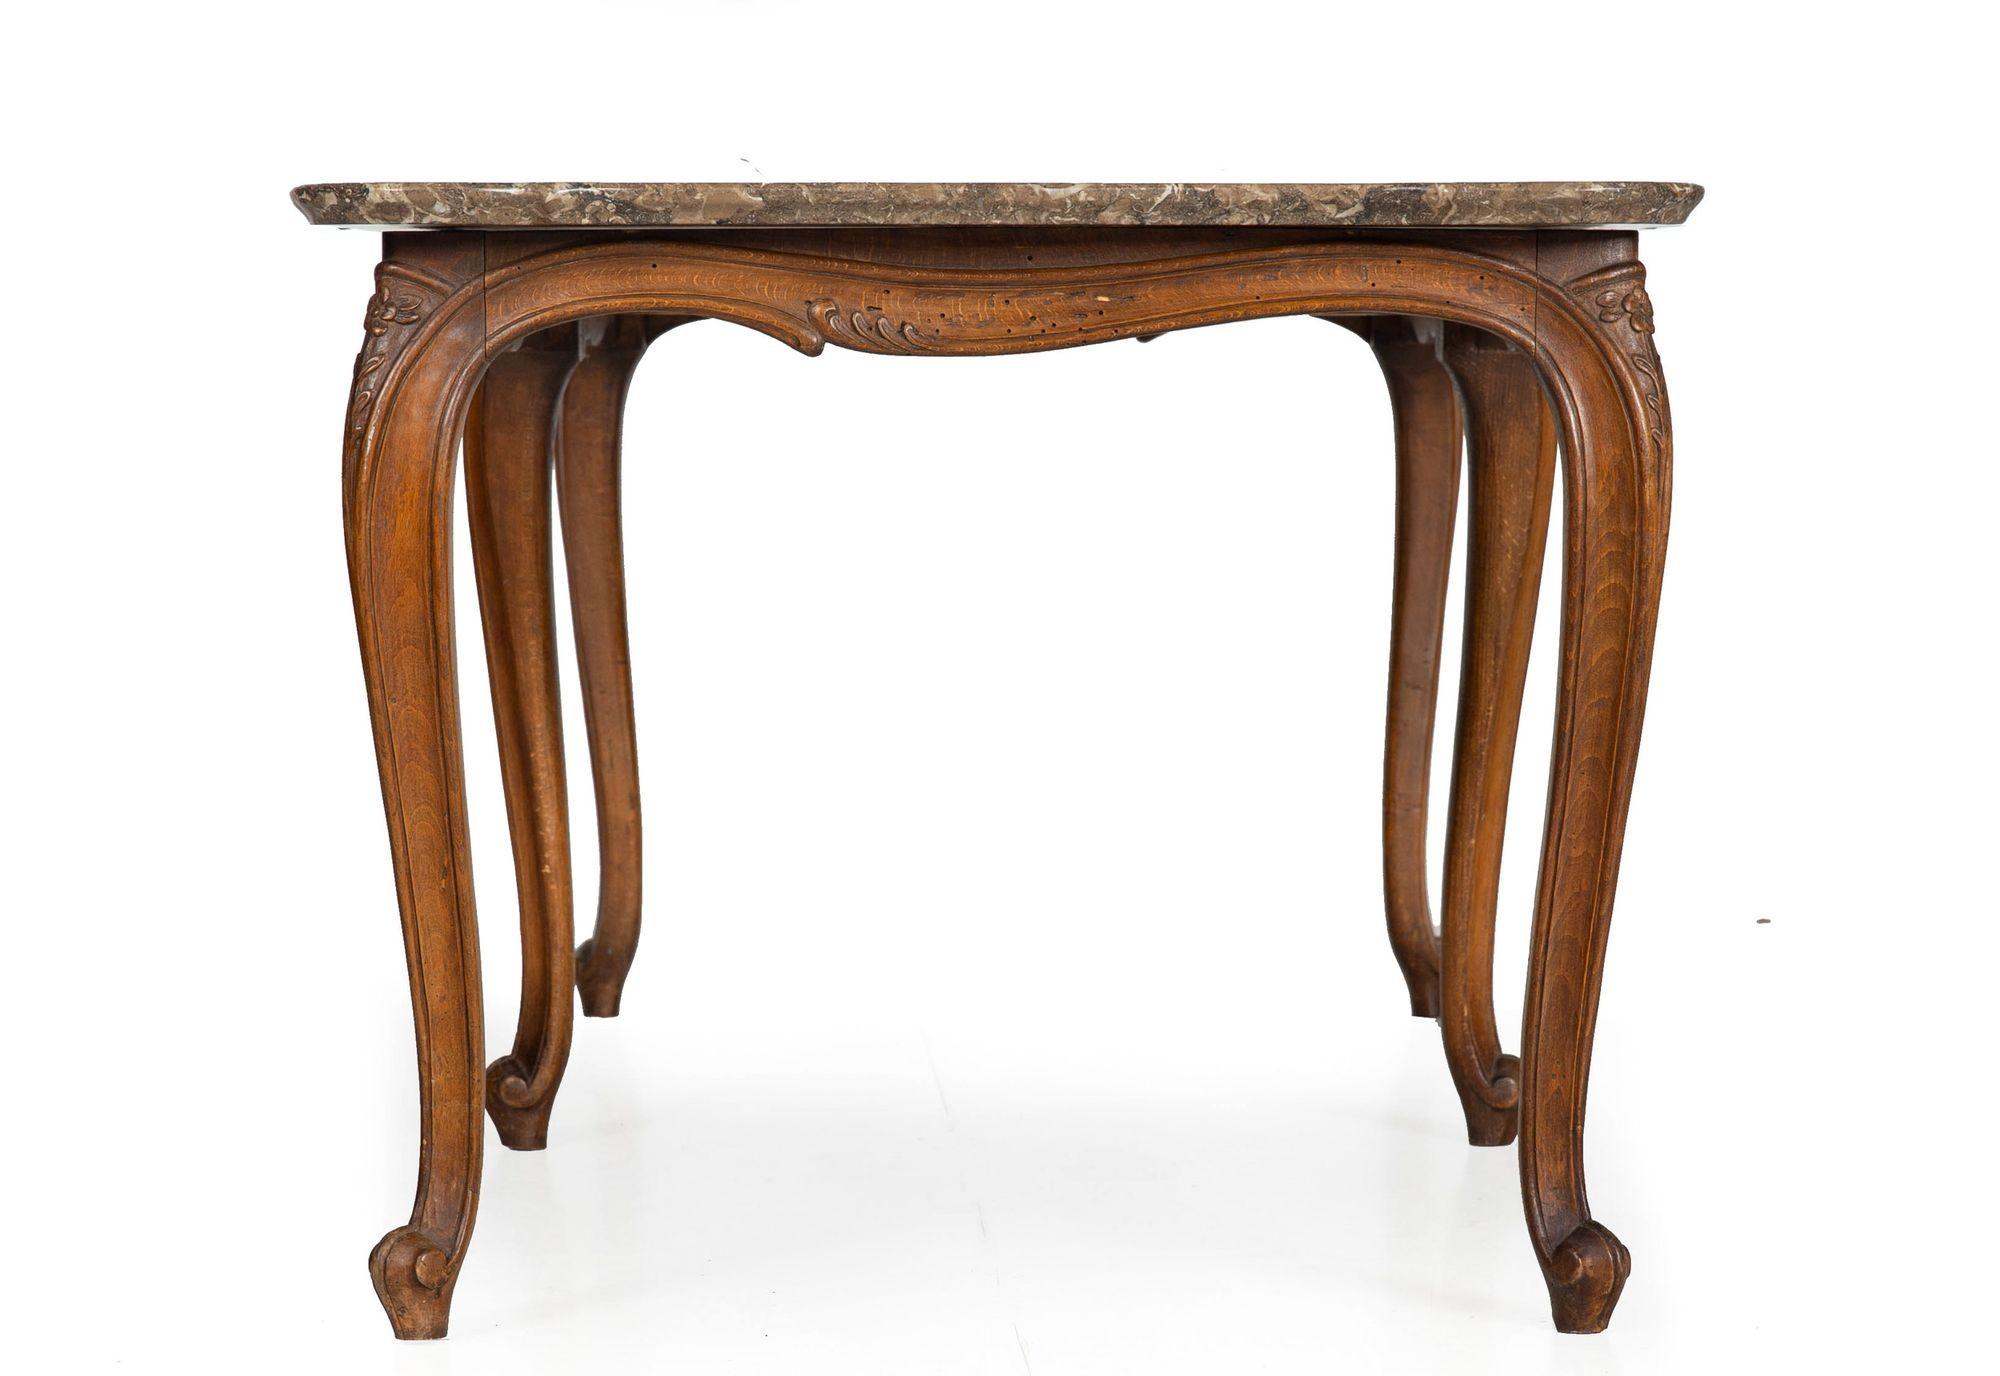 Rococo Revival French Antique Carved Walnut Marble Top Low Coffee Cocktail Table For Sale